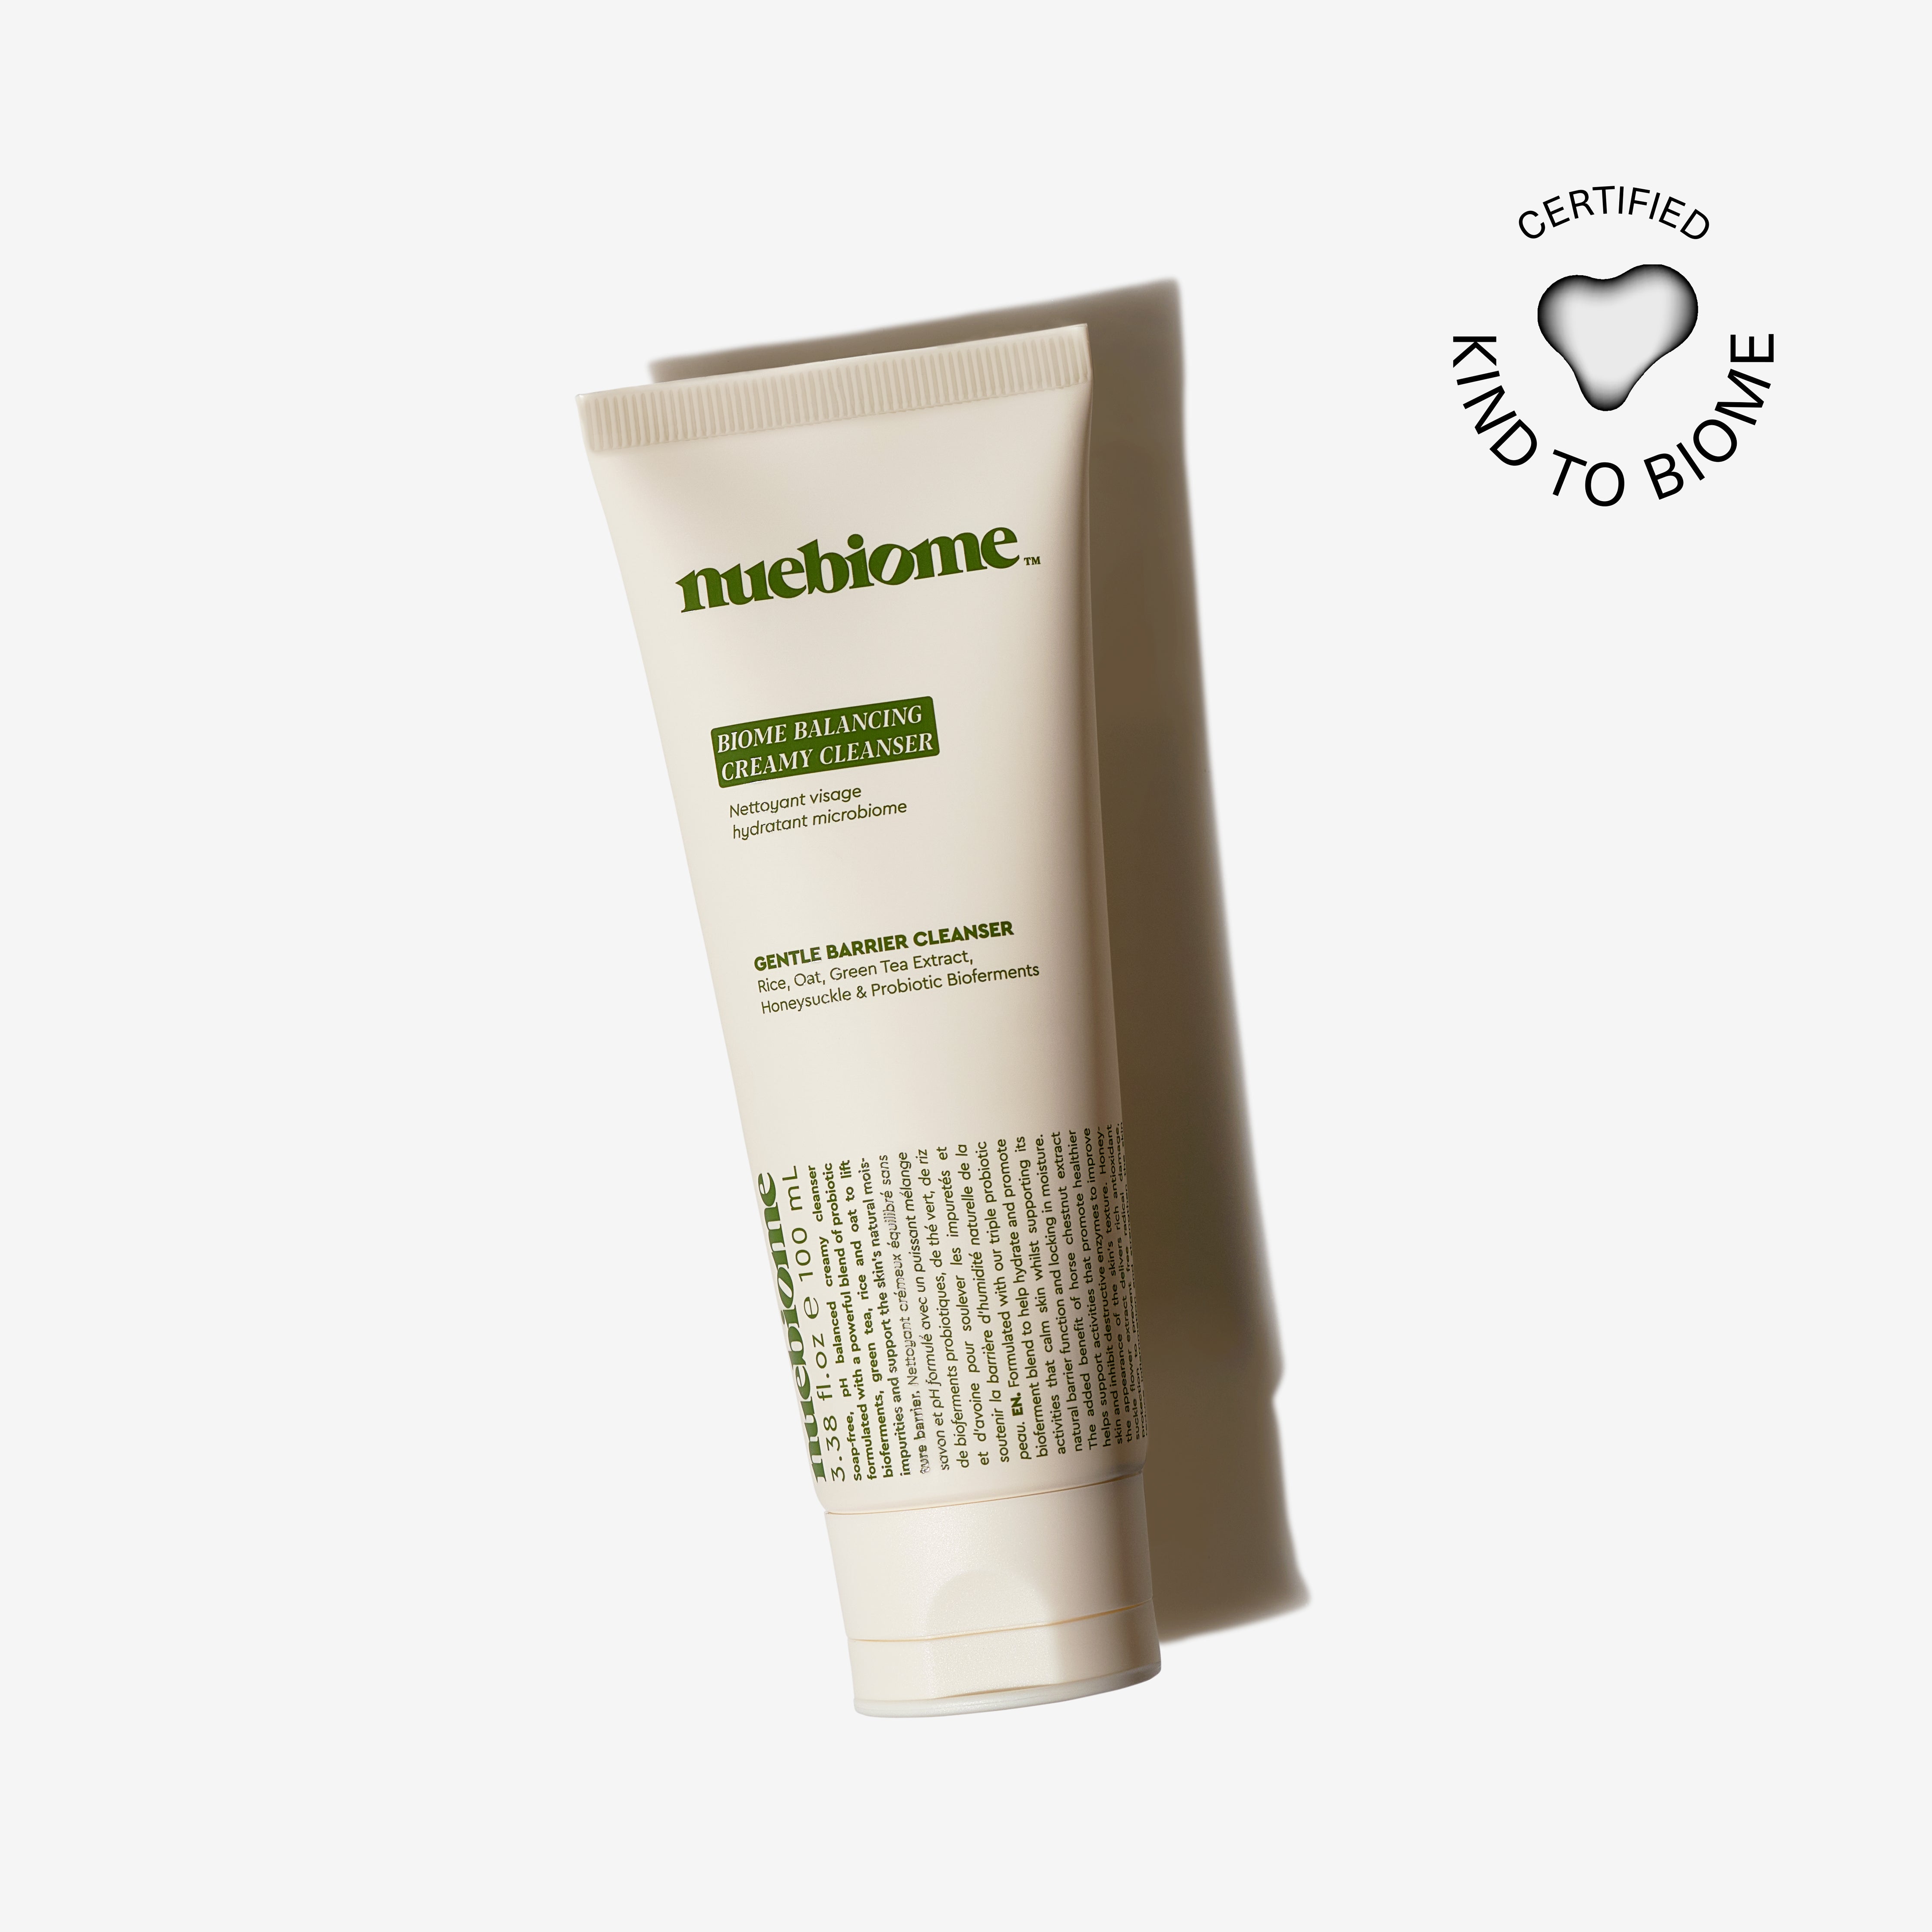 probiotic face wash creamy cleanser